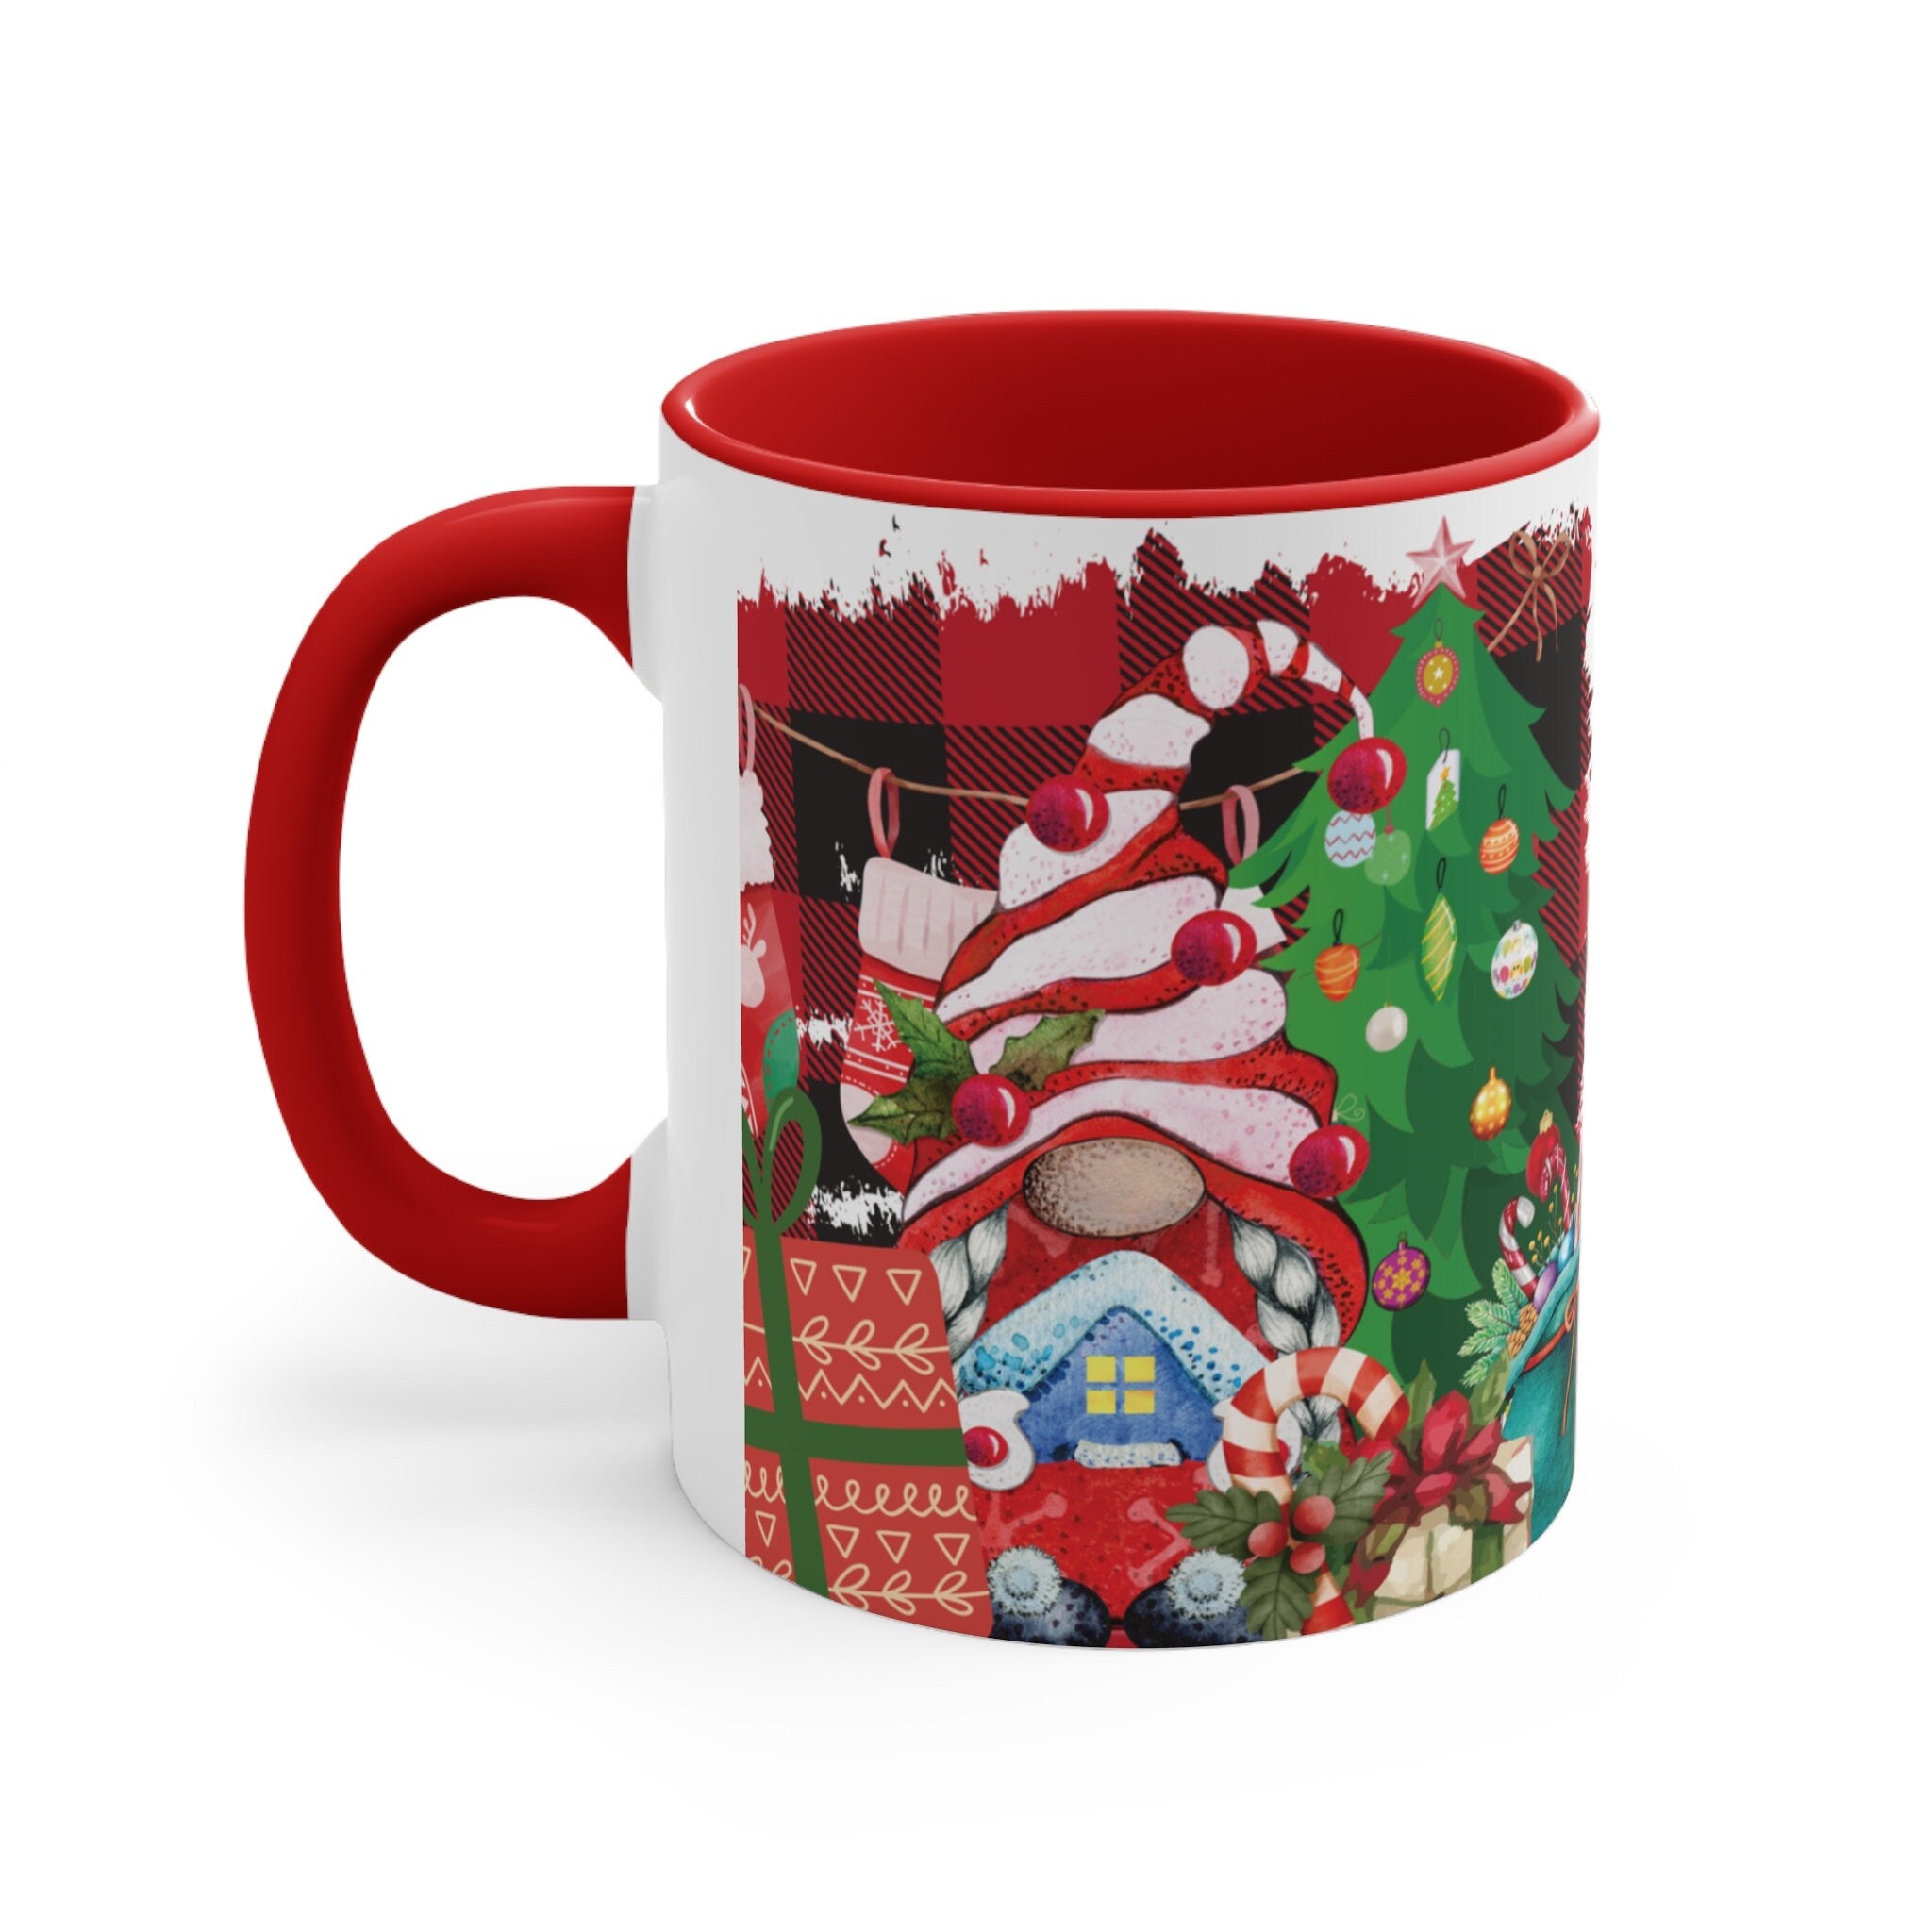 Charming Ceramic Gnome Mug: Whimsical Christmas Decor for Cozy Mornings. Embrace the Holiday Spirit with Every Sip!